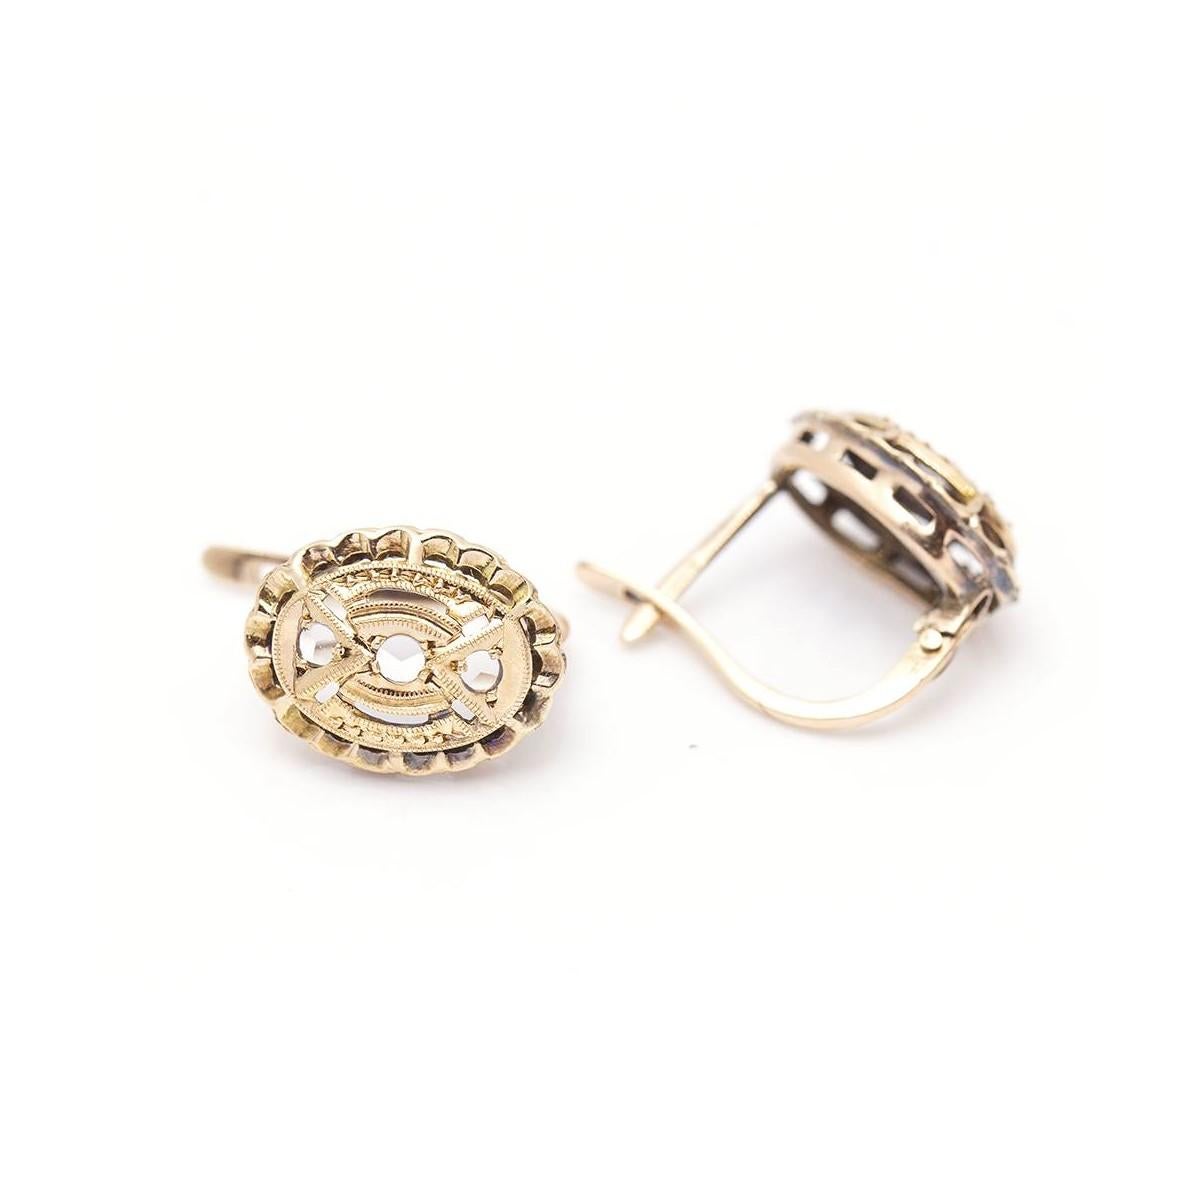 Earrings in Gold and Diamonds original year 1920 for woman  6x Diamonds in antique cut with total weight approx. 0,05ct  Clip clasp (catalan clasp)  18kt Yellow Gold  1,40 grams.  These earrings are in very good condition  Original second hand